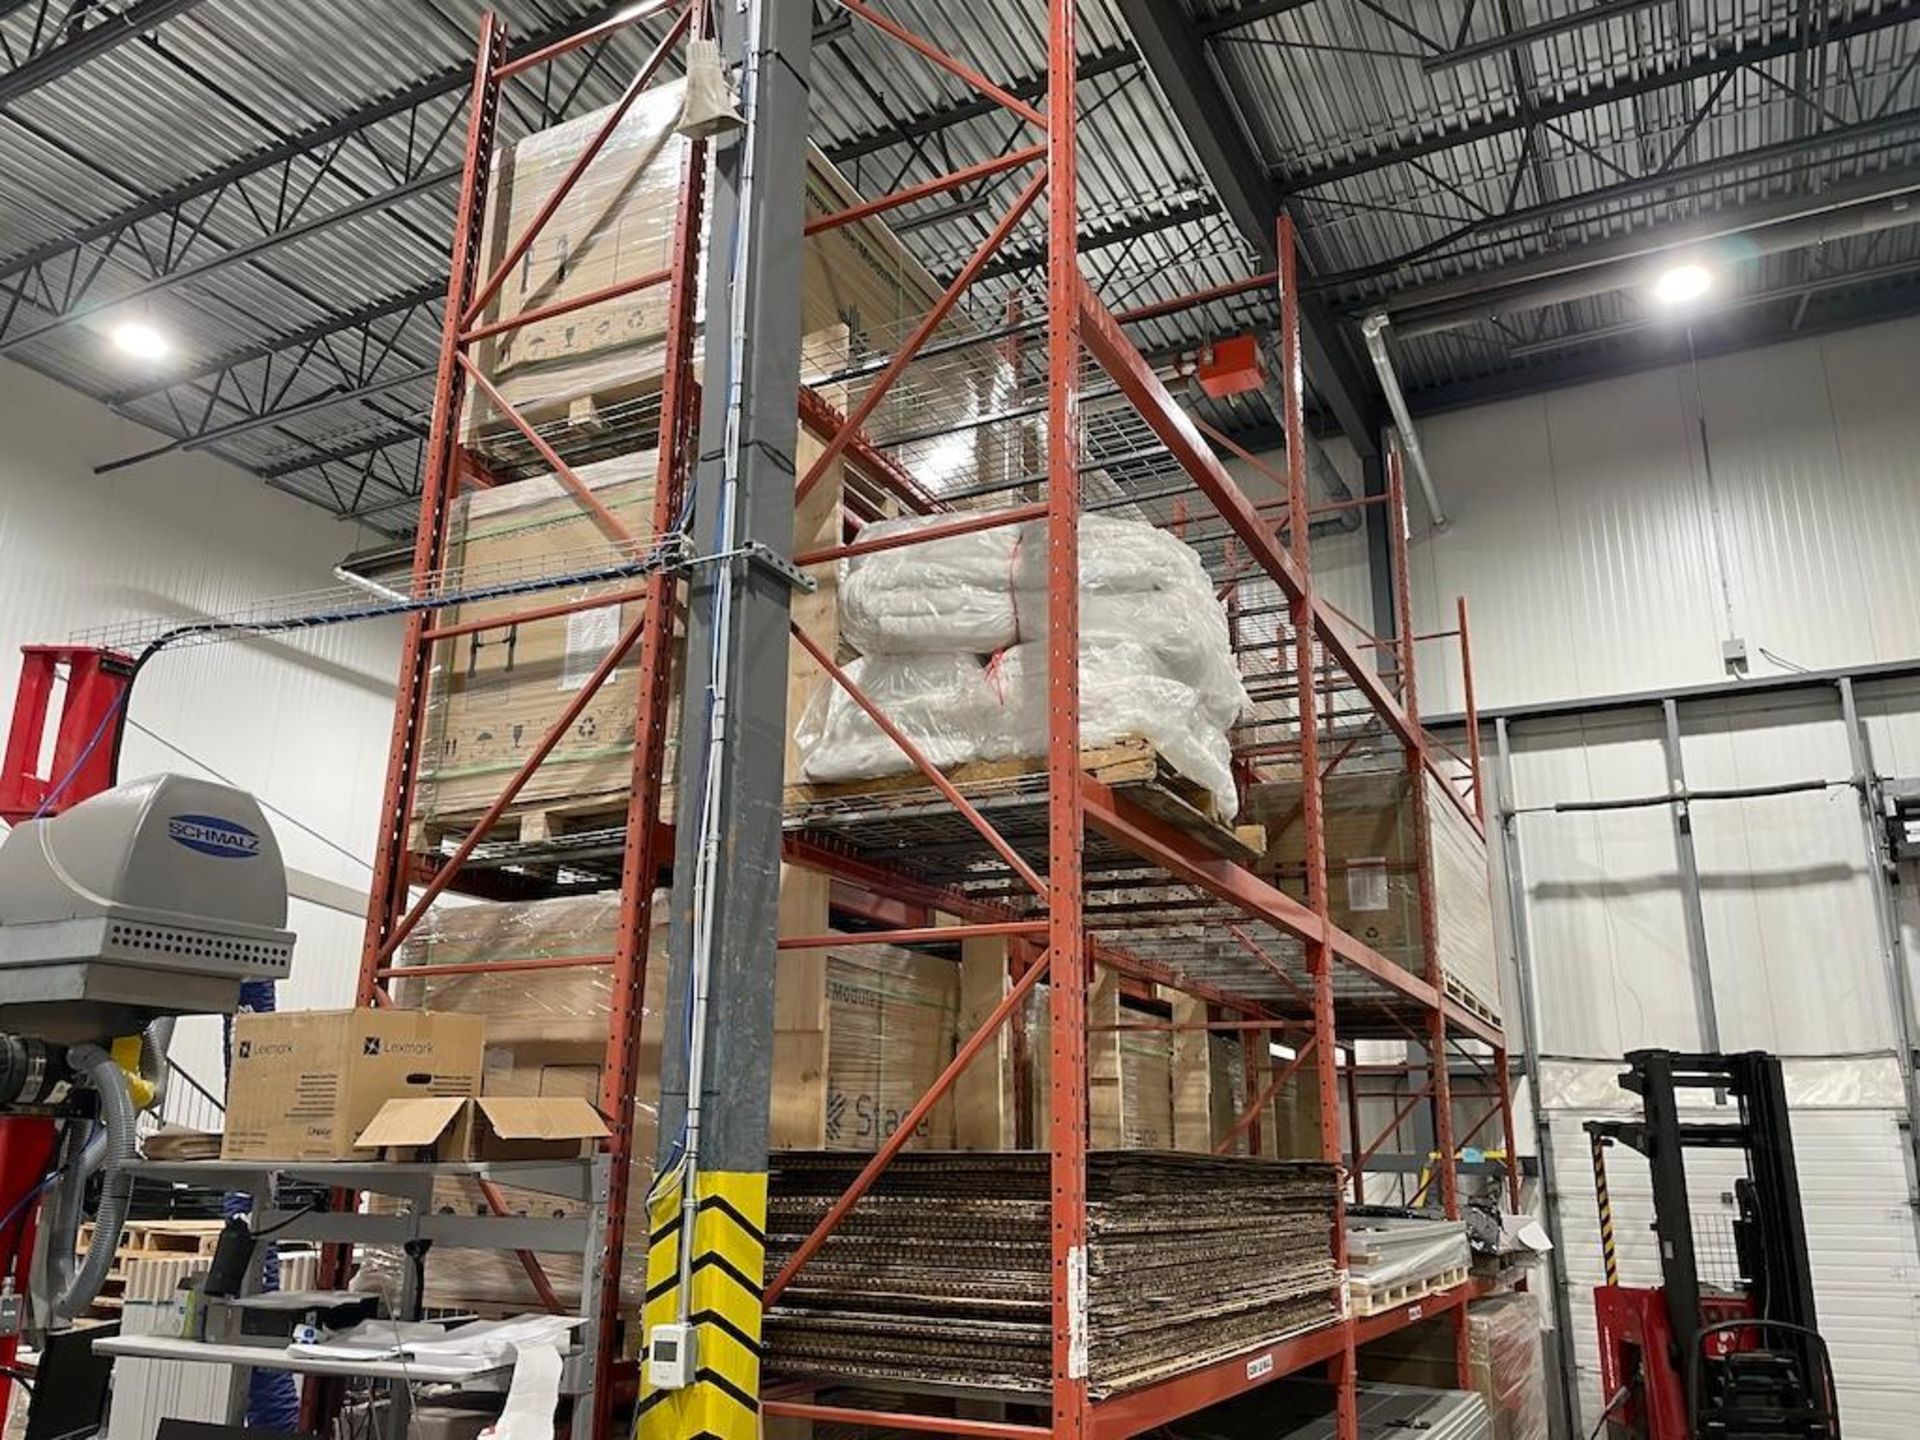 LOT ASSORTED ADJUSTABLE PALLET RACKING THROUGHOUT, APPROXIMATELY 47 SECTIONS [TROIS RIVIERES]*PLEASE - Image 6 of 16